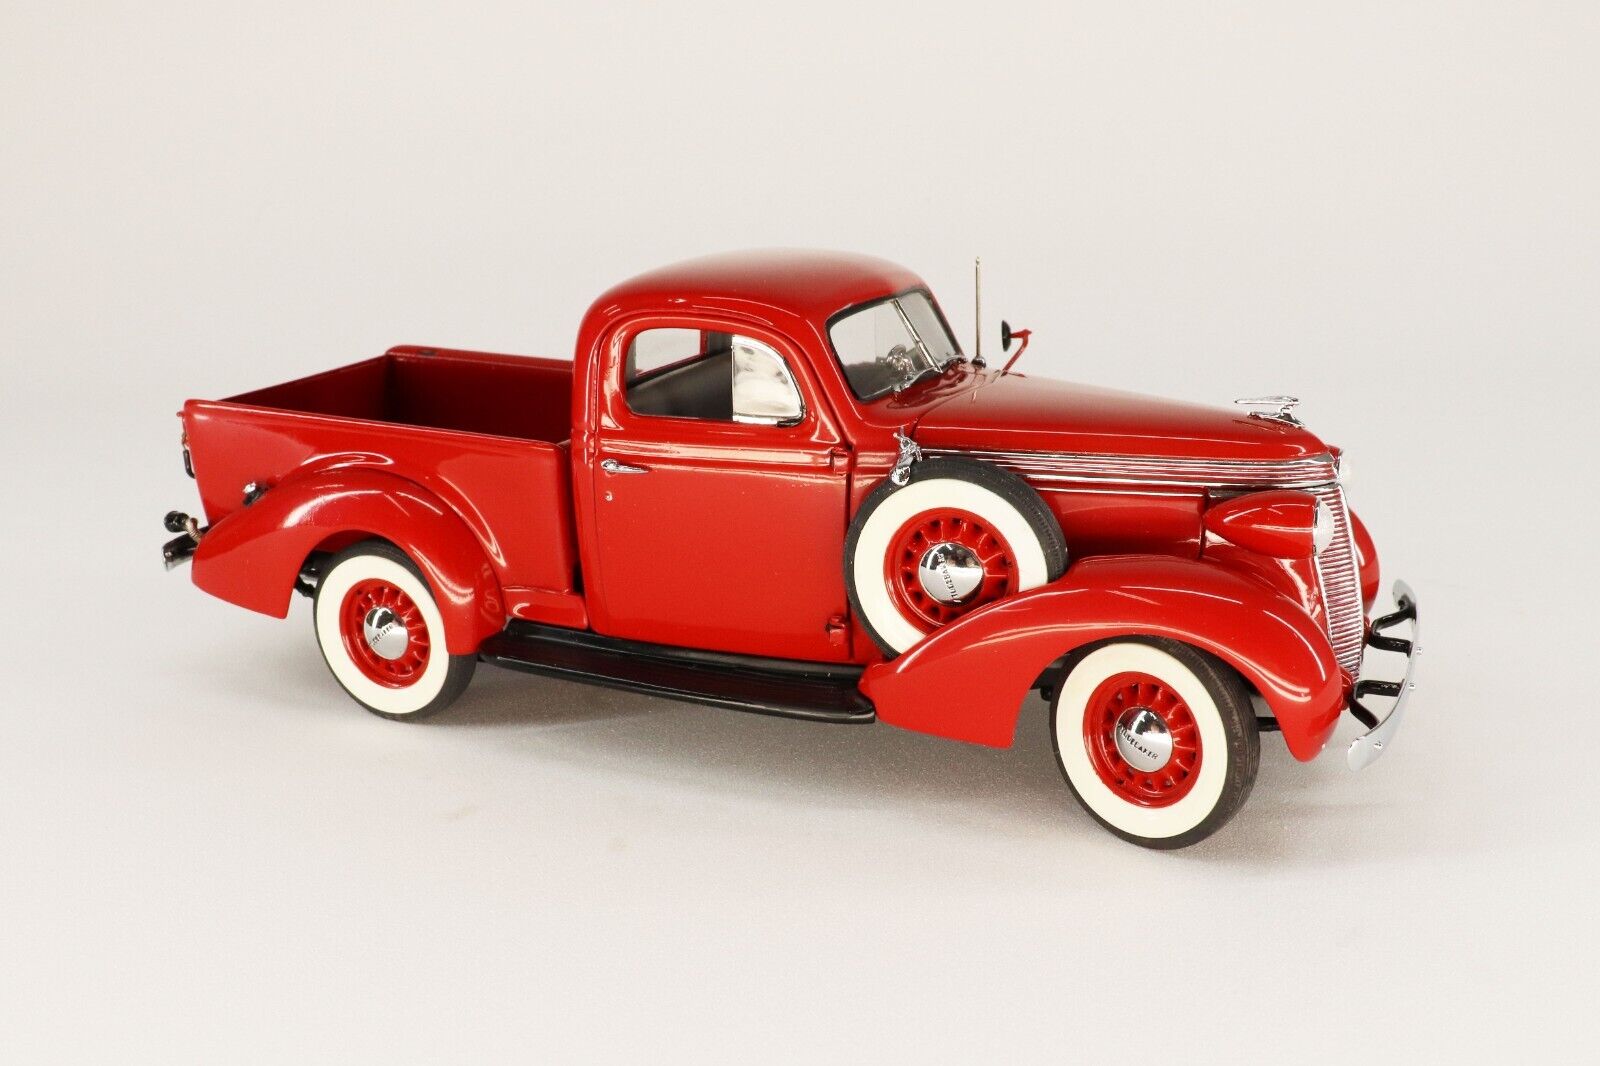 Danbury Mint 1937 Studebaker Coupe Pickup 1:24 Diecast - Red - Mint In Box